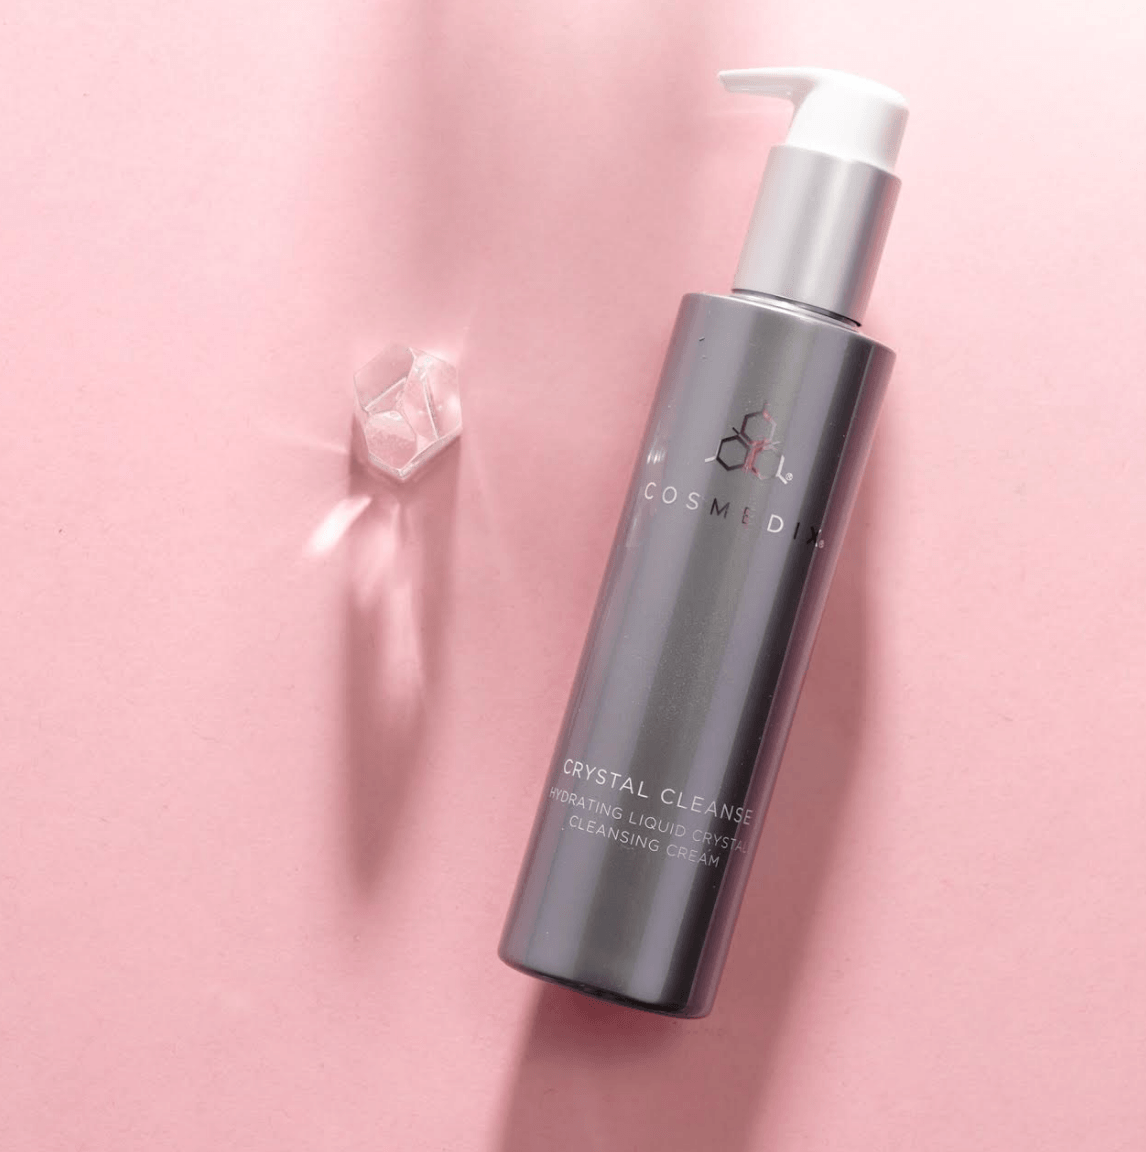 COSMEDIX Crystal Cleanse NEW CLEANSER - Exquisite Laser Clinic